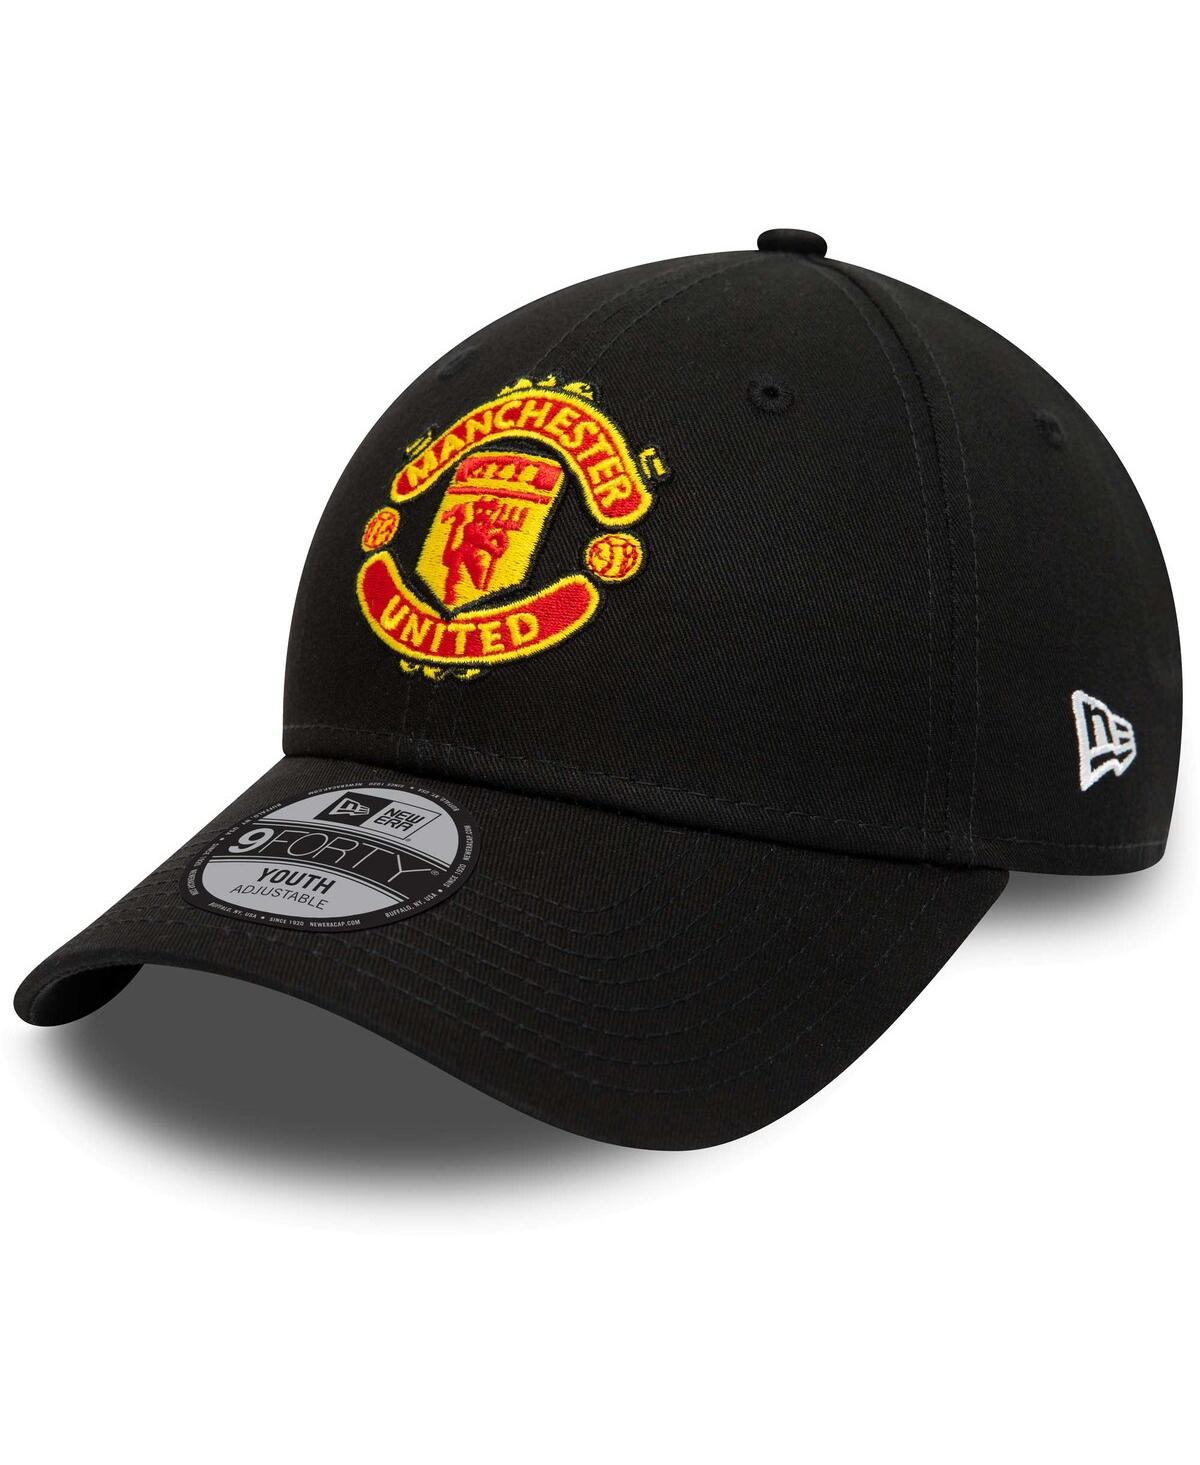 New Era Kids' Youth Boys And Girls  Black Manchester United Core 9forty Adjustable Hat